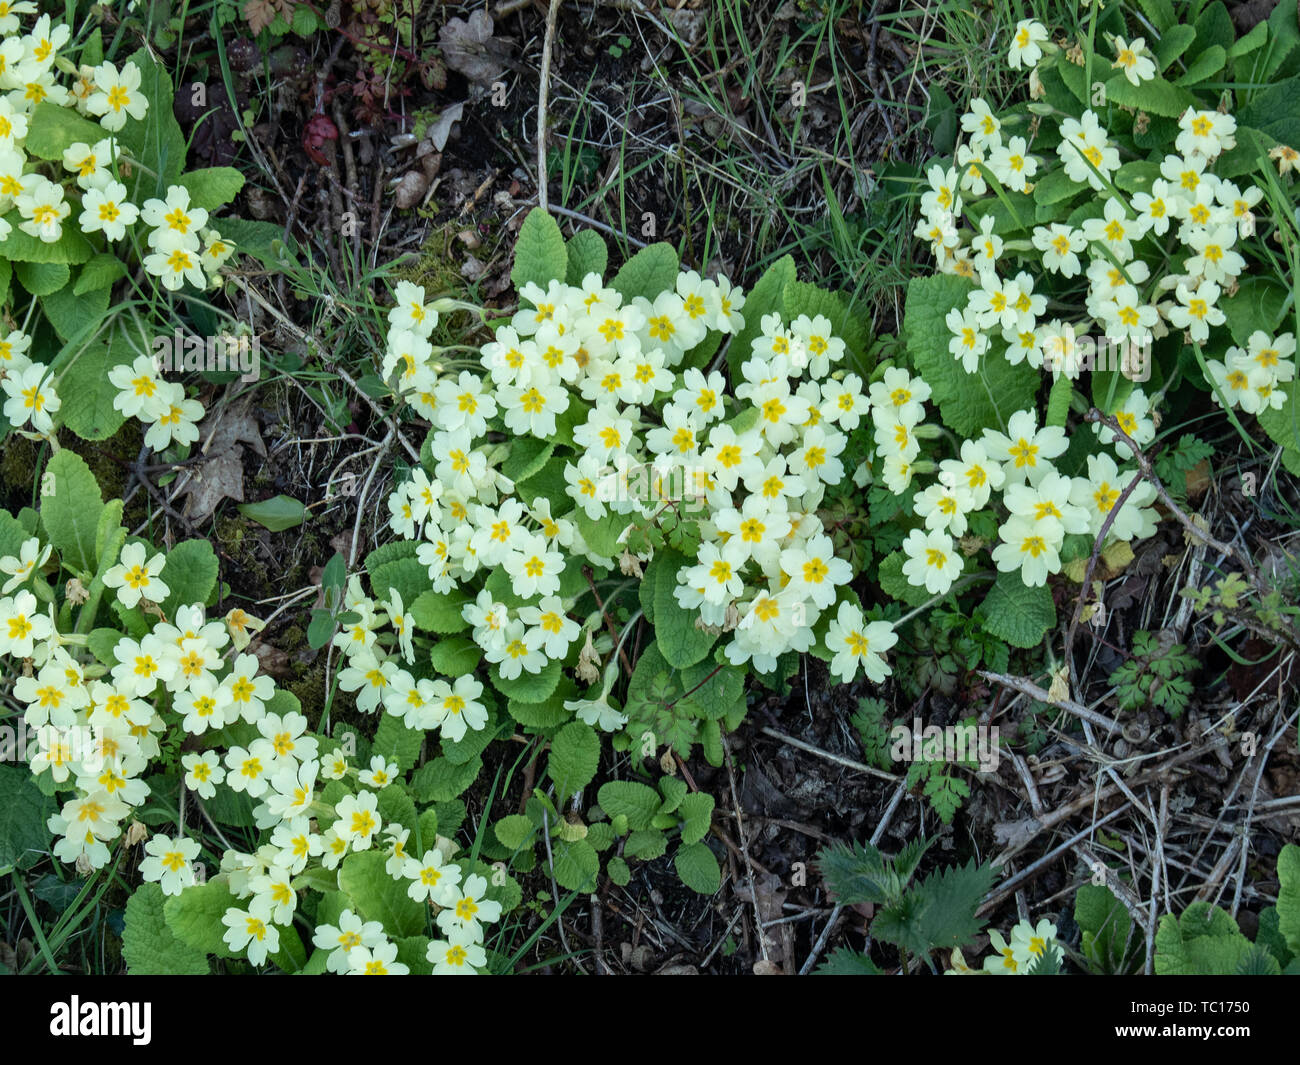 Clump of wild primrose (Primula vulgaris) growing on the edge of a field Stock Photo